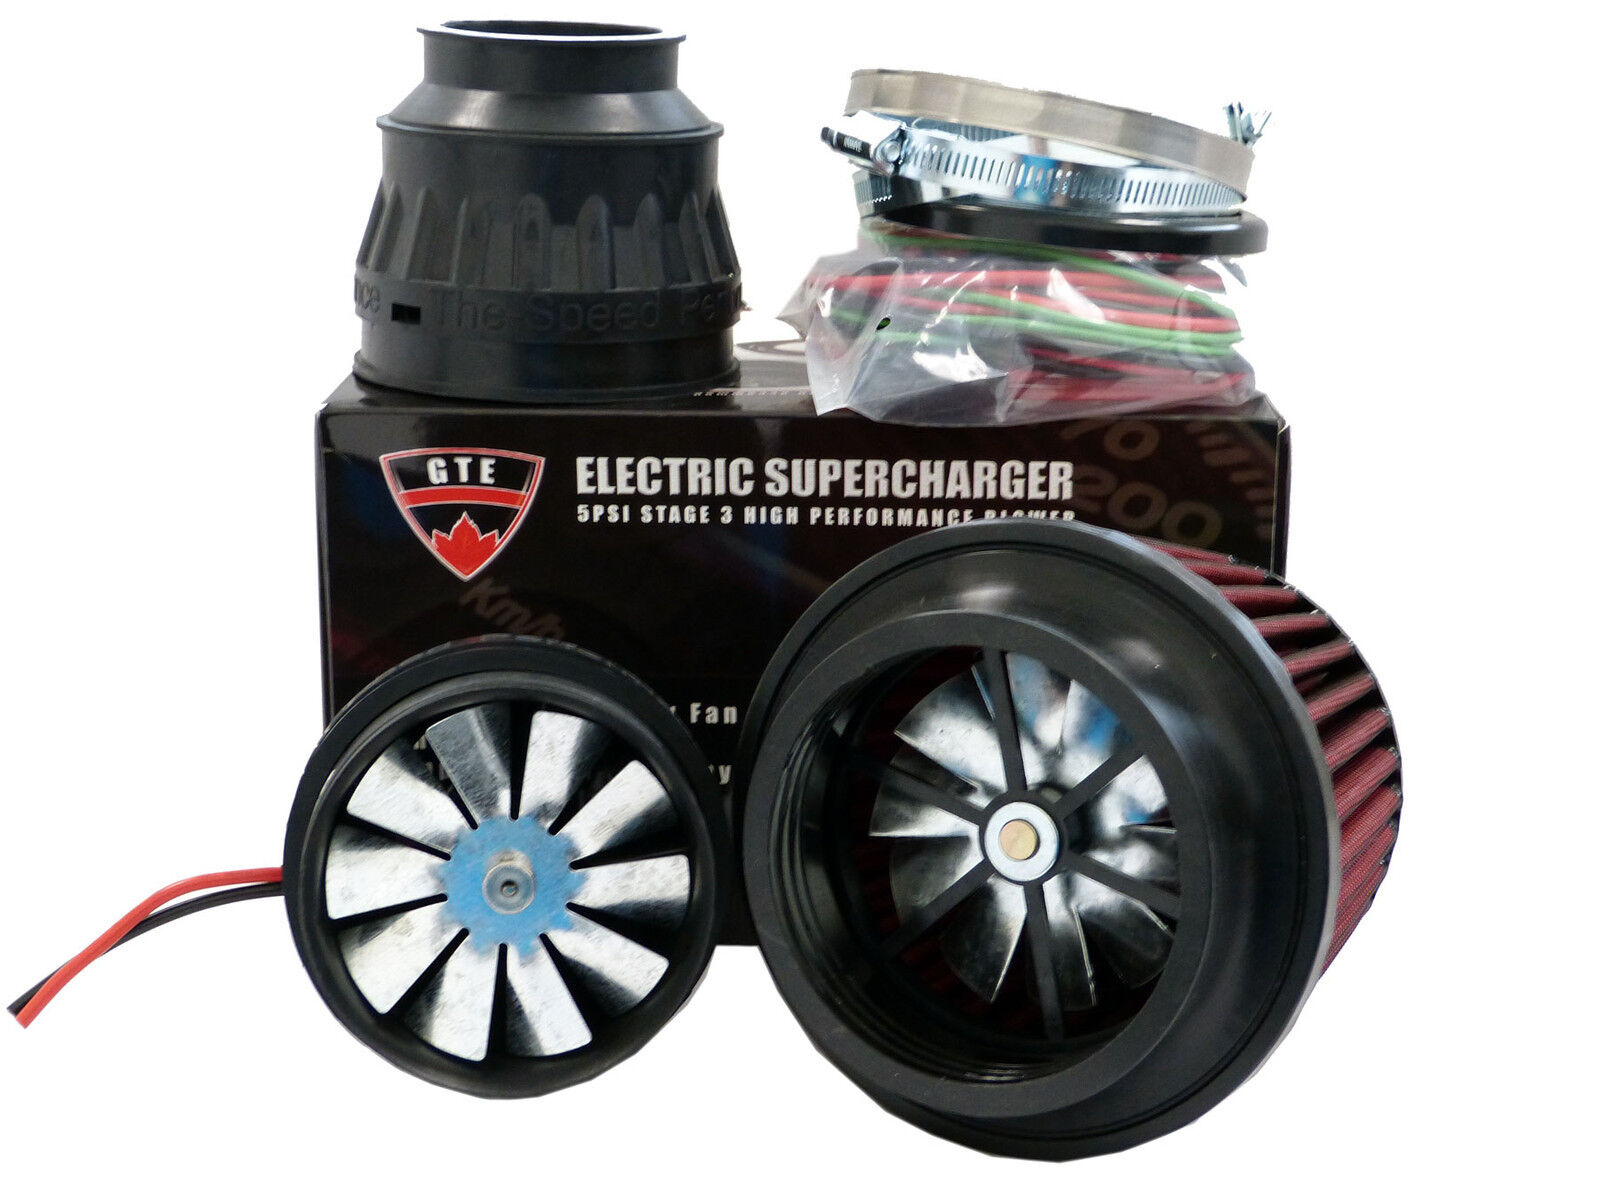 5PSI ELECTRIC SUPERCHARGER TURBO ADD HORSEPOWER + TORQUE INTAKE FOR Dodge